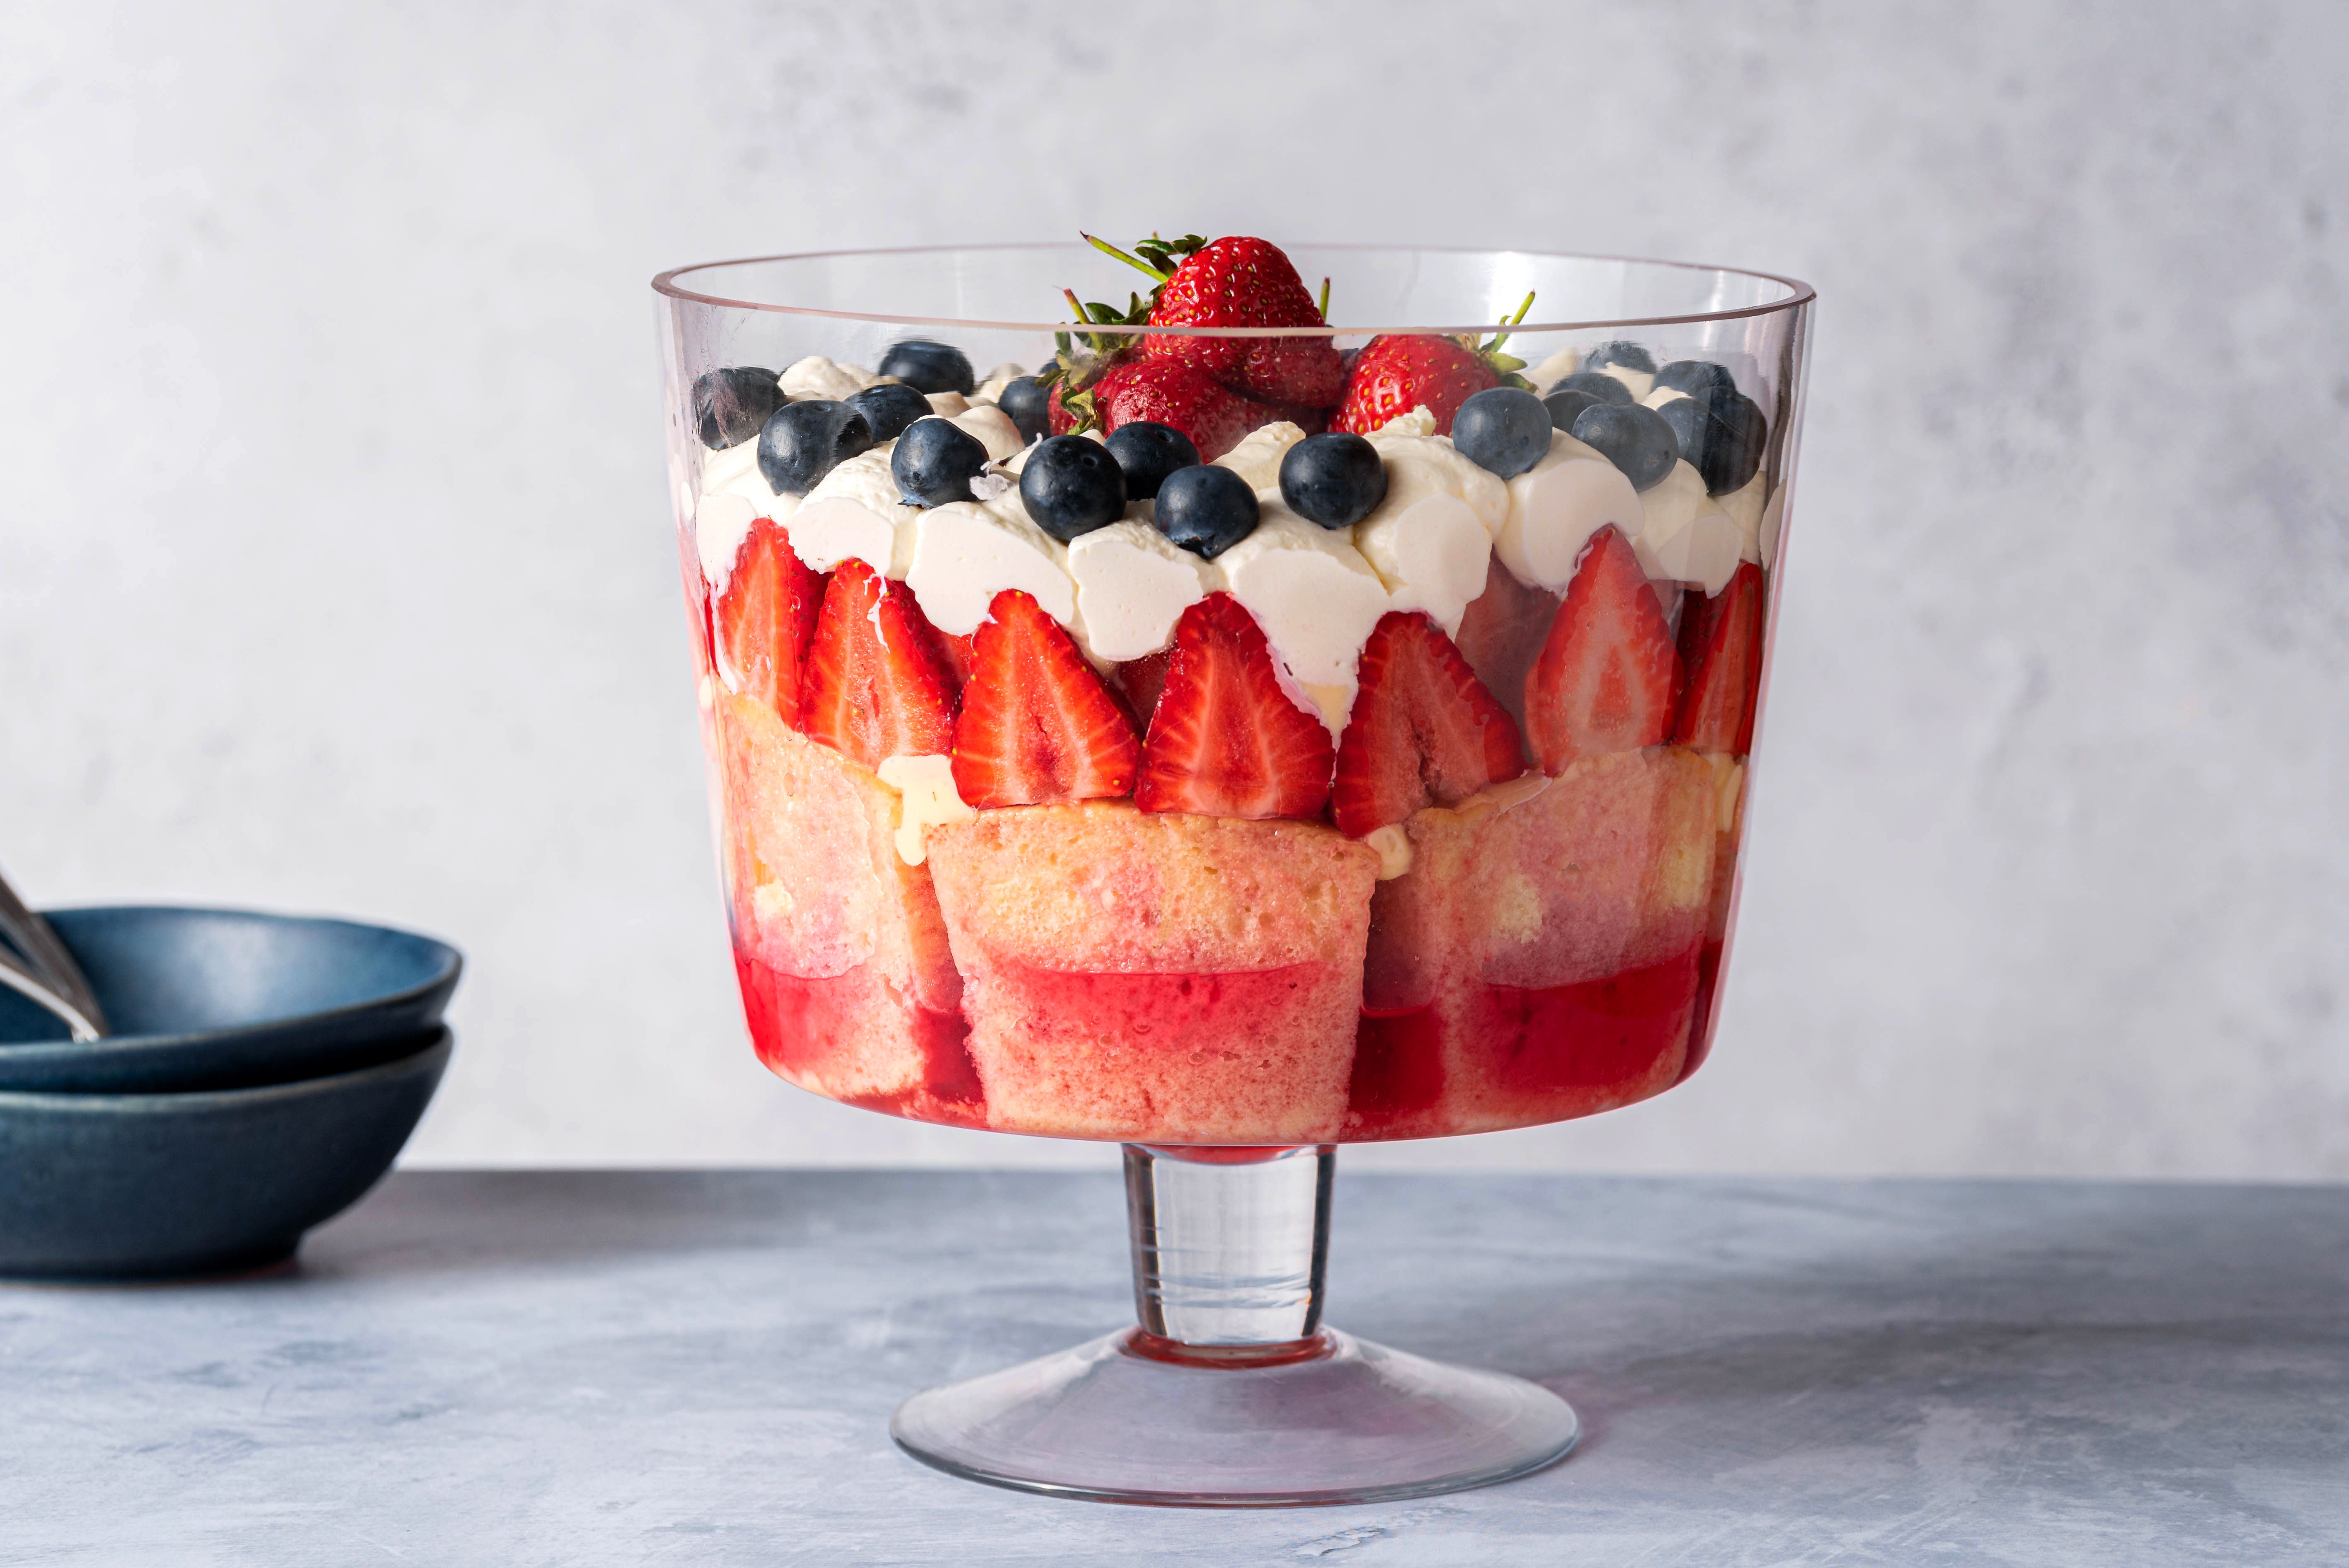 Typical Fourth of July Desserts